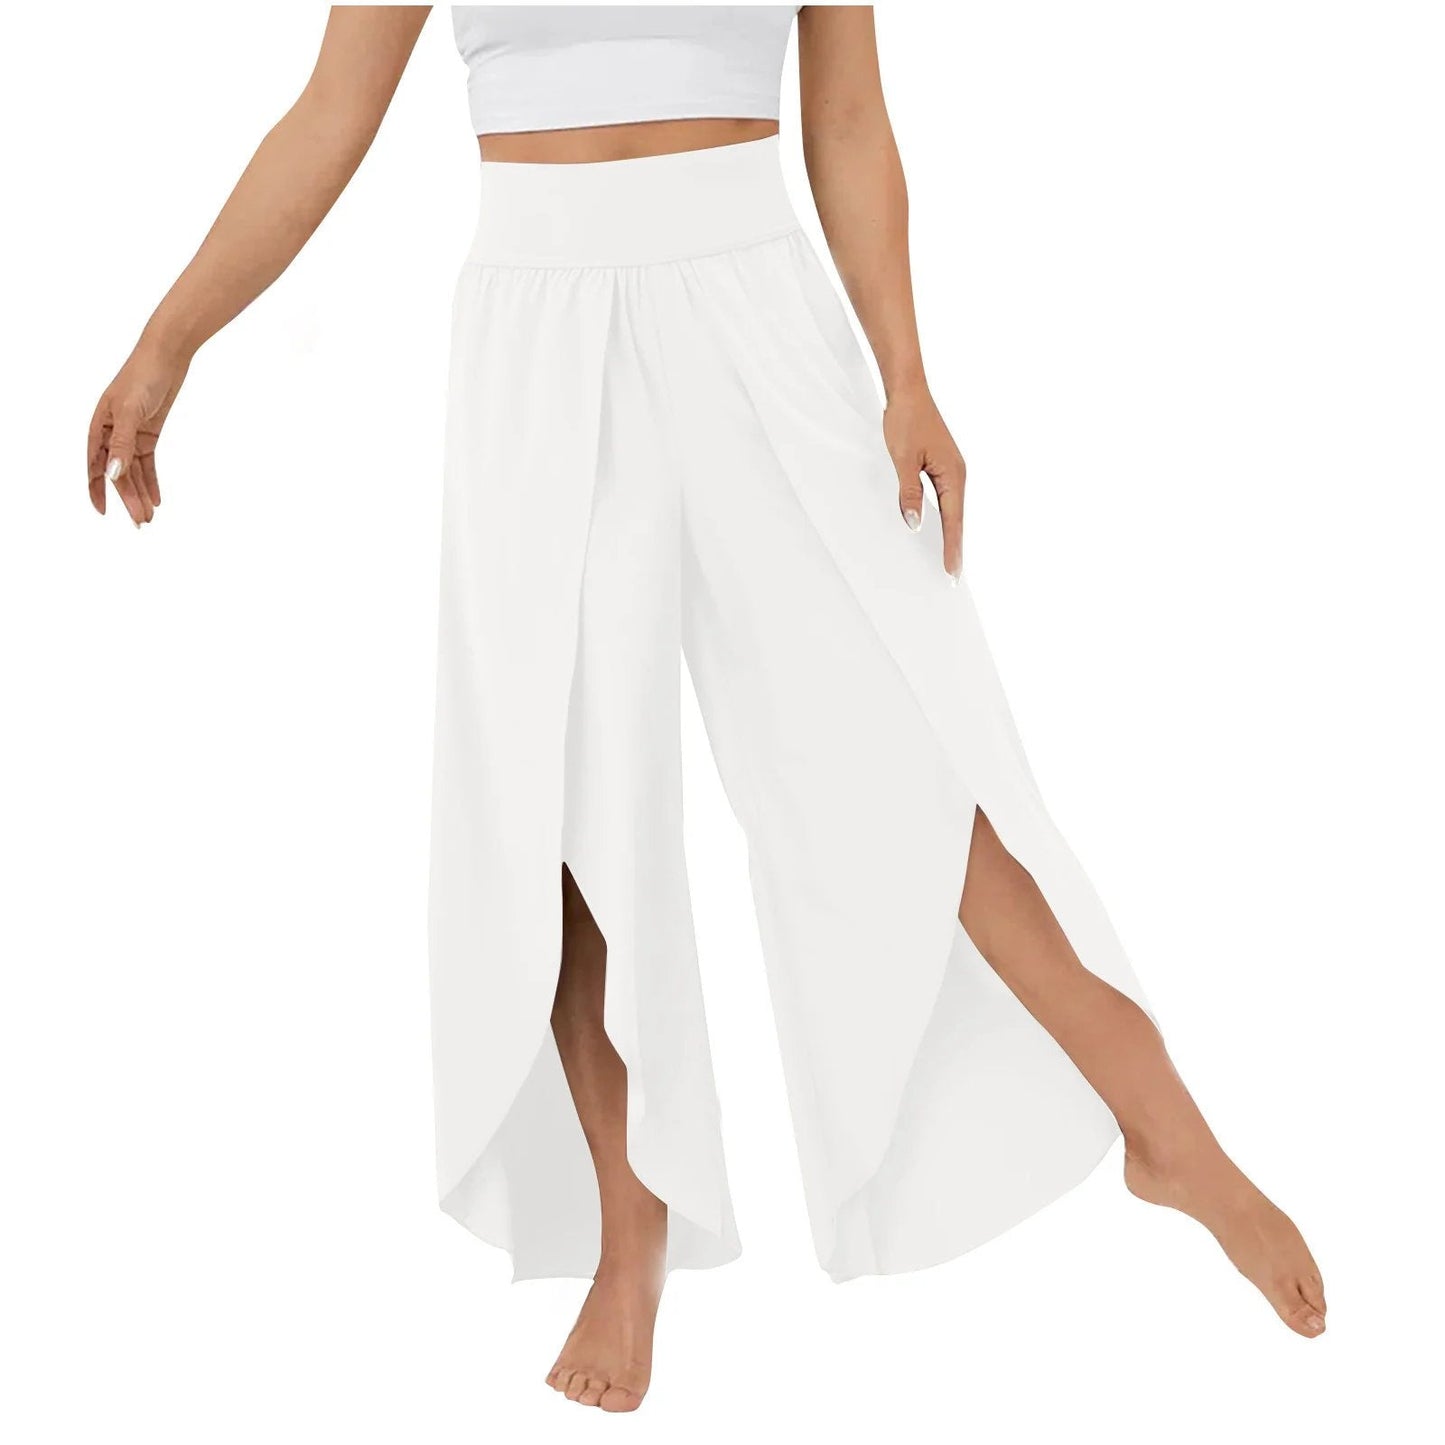 2024🔥Final Day Sale: Save 48% Off - High Waisted Split Wide Leg Quick Dry Casual Pants🎉